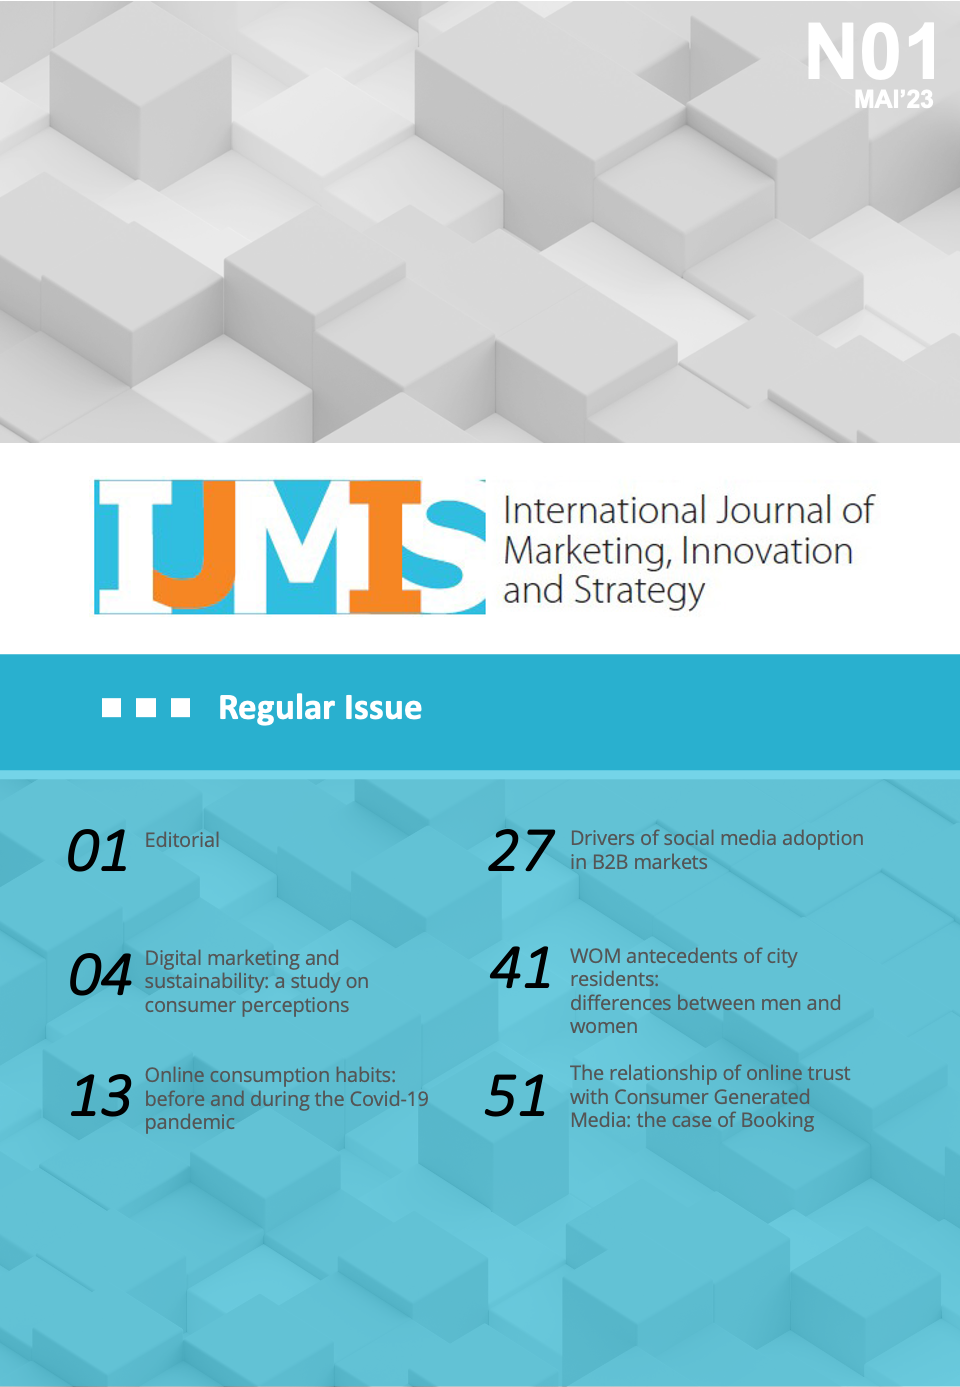 International Journal of Marketing, Innovation and Strategy (IJMIS): Volume 1, Number 1